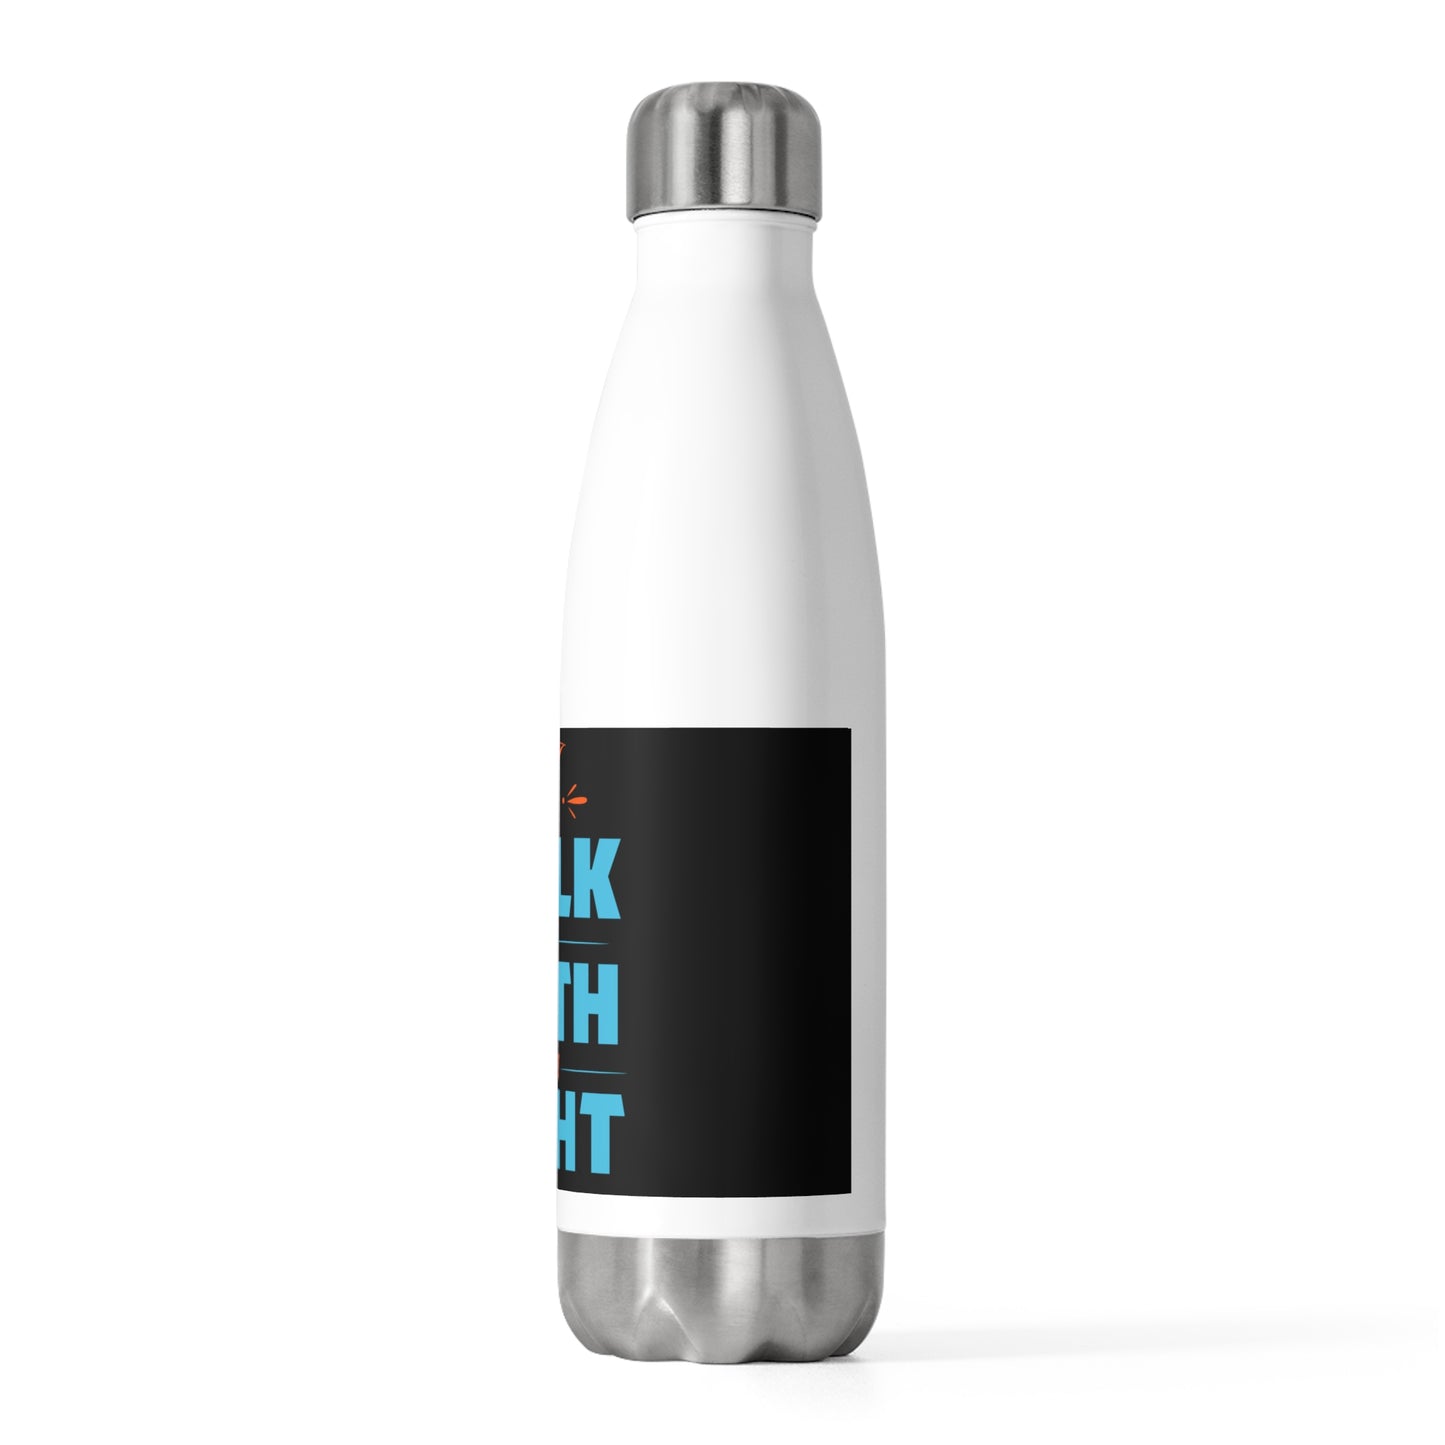 I Walk By Faith Not By Sight Insulated Bottle 20 oz